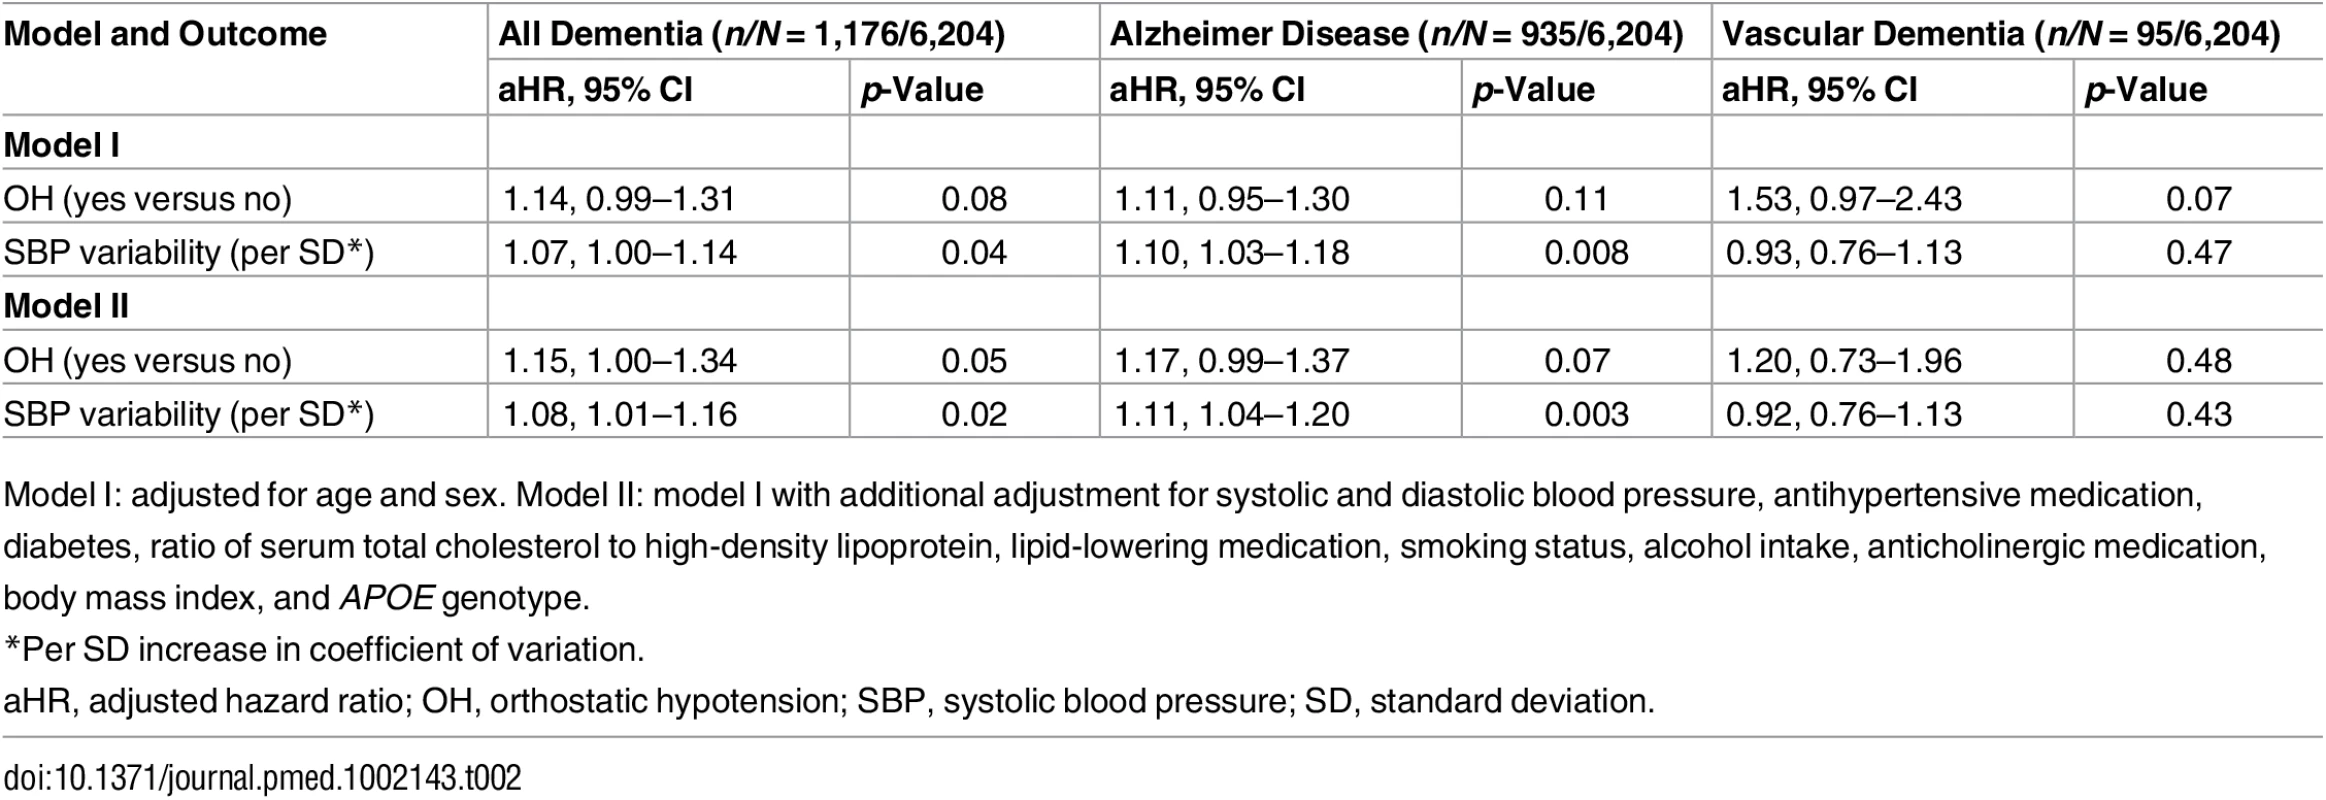 Orthostatic hypotension and the risk of dementia.